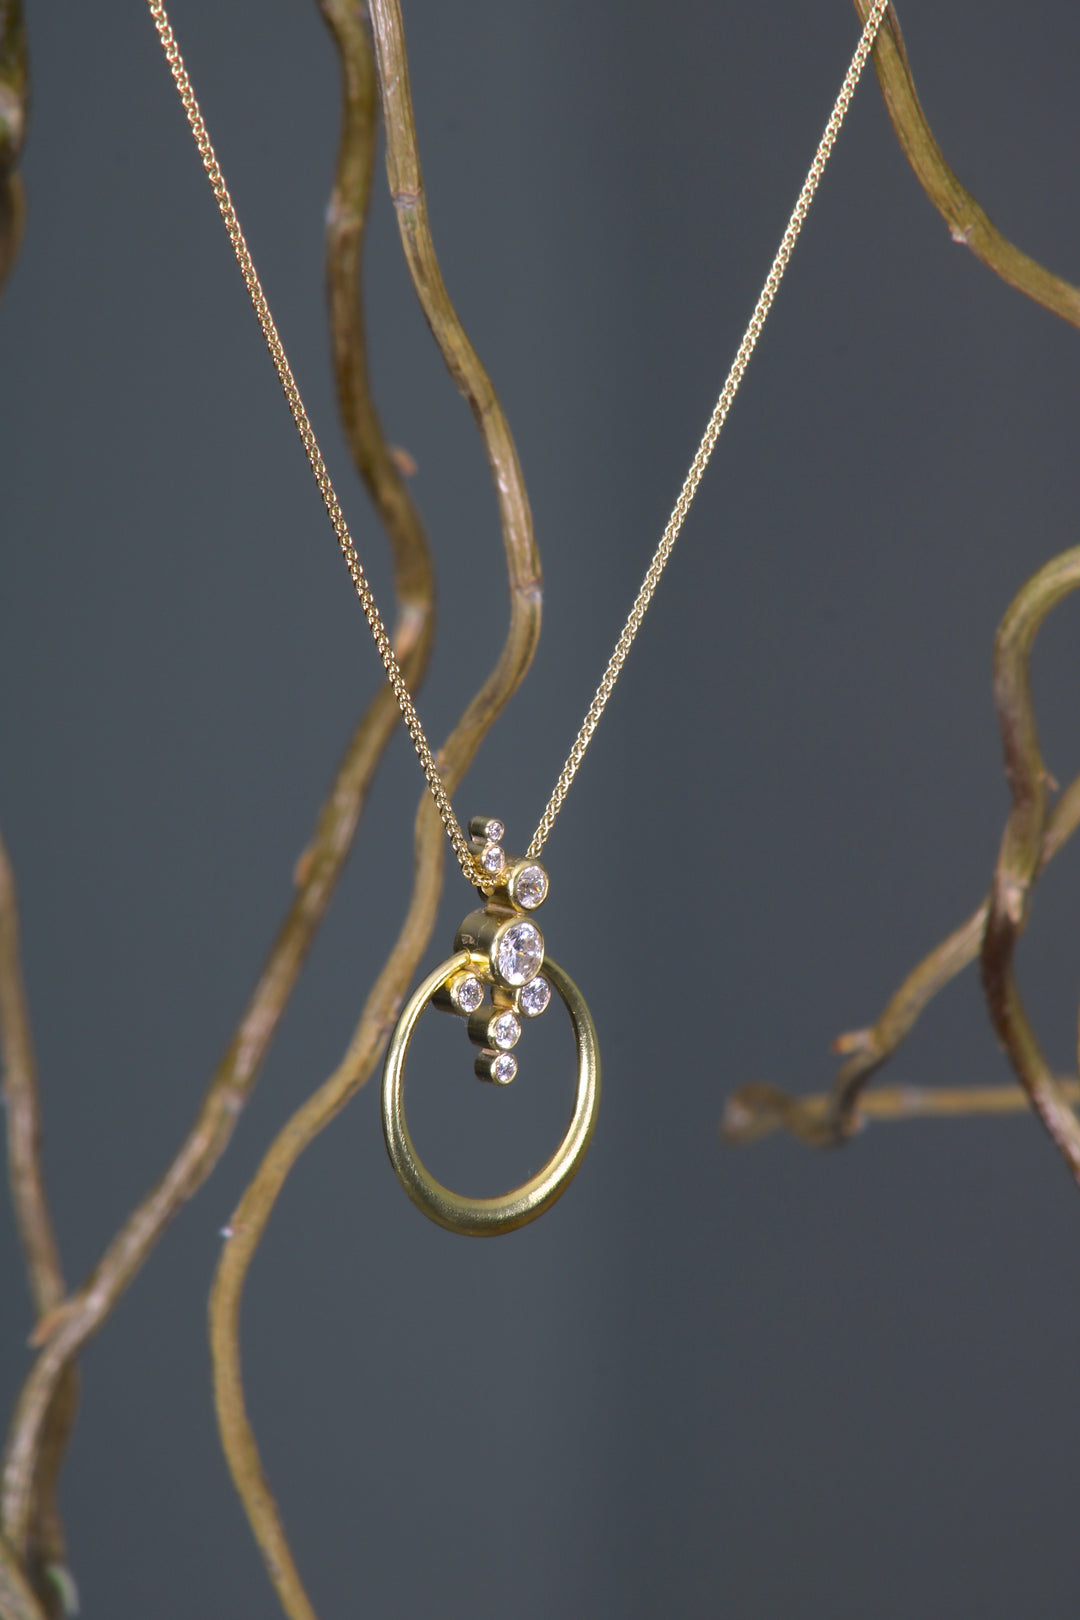 Gold Hoop Necklace with Cascading Diamonds (09852)